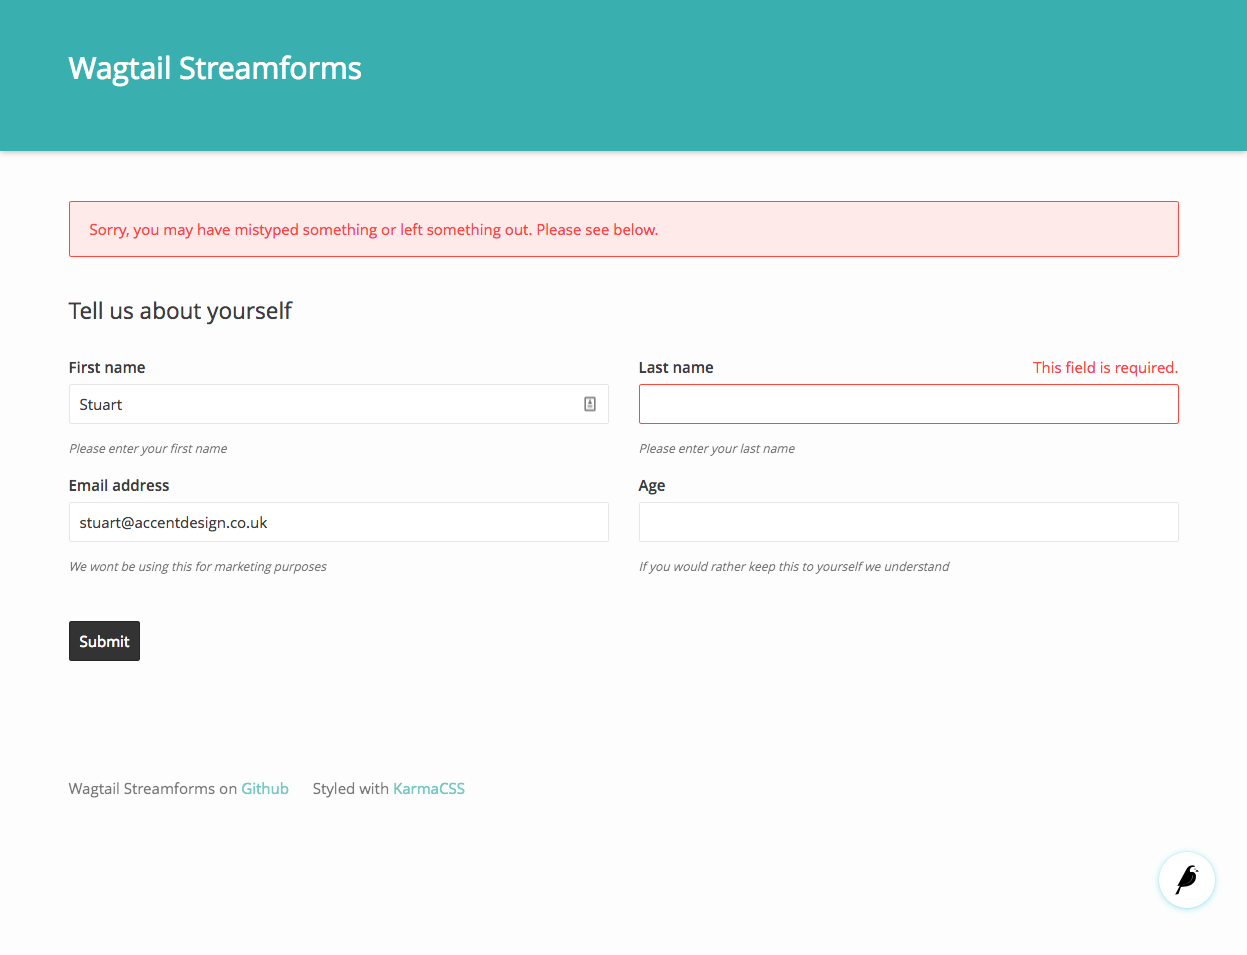 http://wagtailstreamforms.readthedocs.io/en/latest/_images/screen_1.png